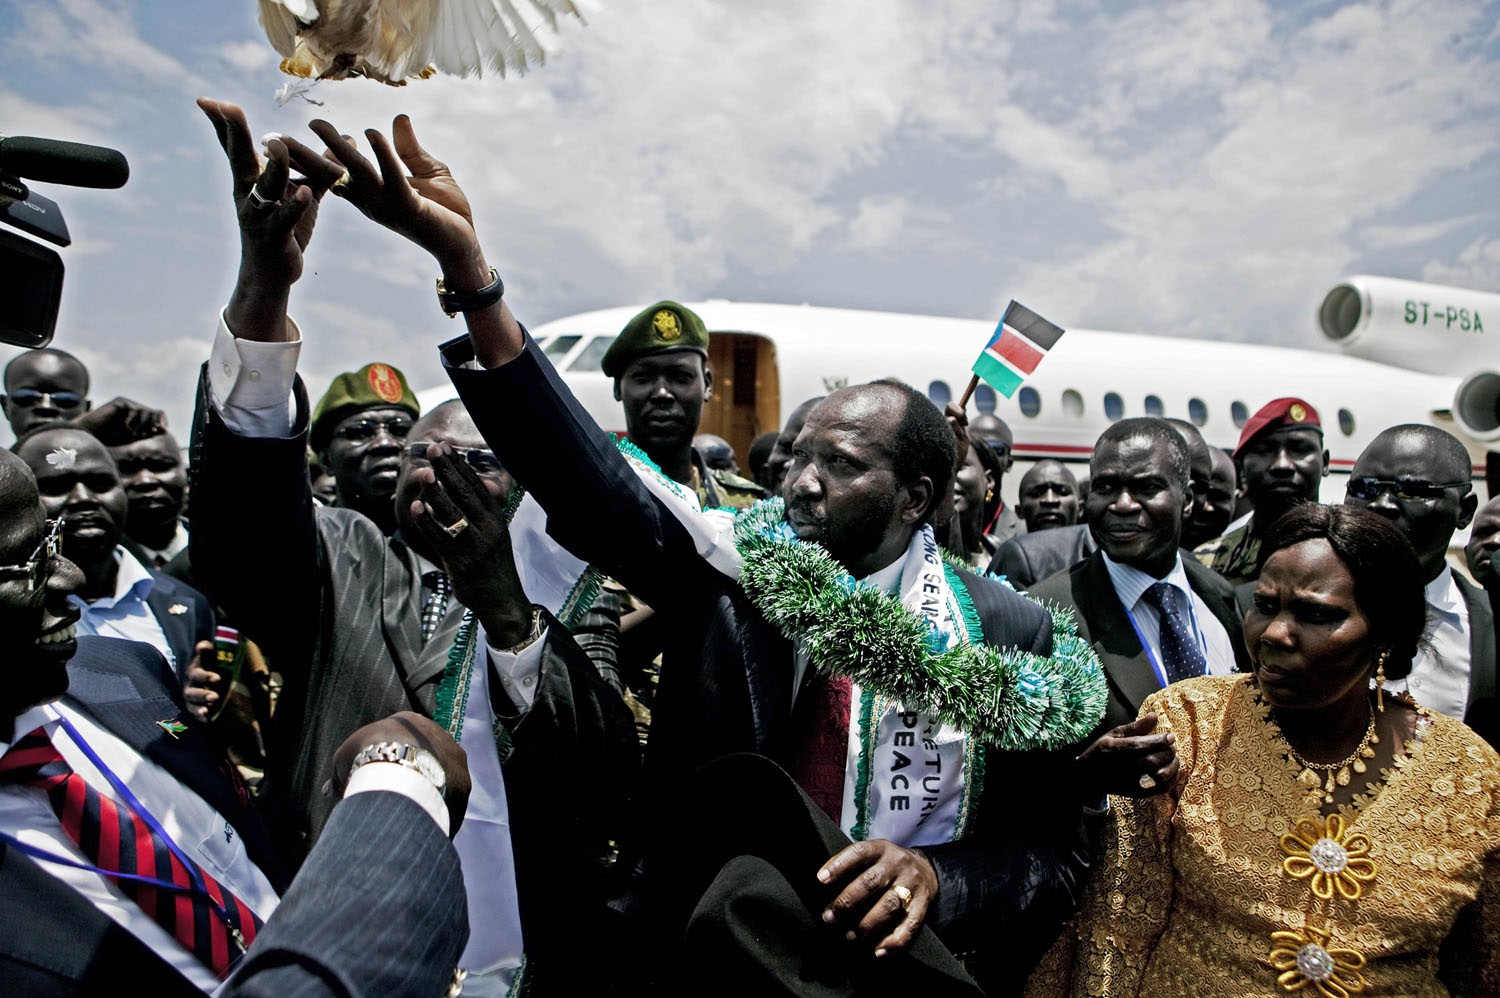 Salva Kiir (green sash), the President of the Government of South Sudan and Riek Machar (2nd on left) release a dove upon Kiir's return from the United States. The two men were bitter enemies during the latter years of the civil war in southern Sudan. Machar aligned with the northern government in Khartoum and used his forces against Kiir and other SPLA commanders. The relationship is emblematic of the tense and distrusting alliances that define the southern political landscape.